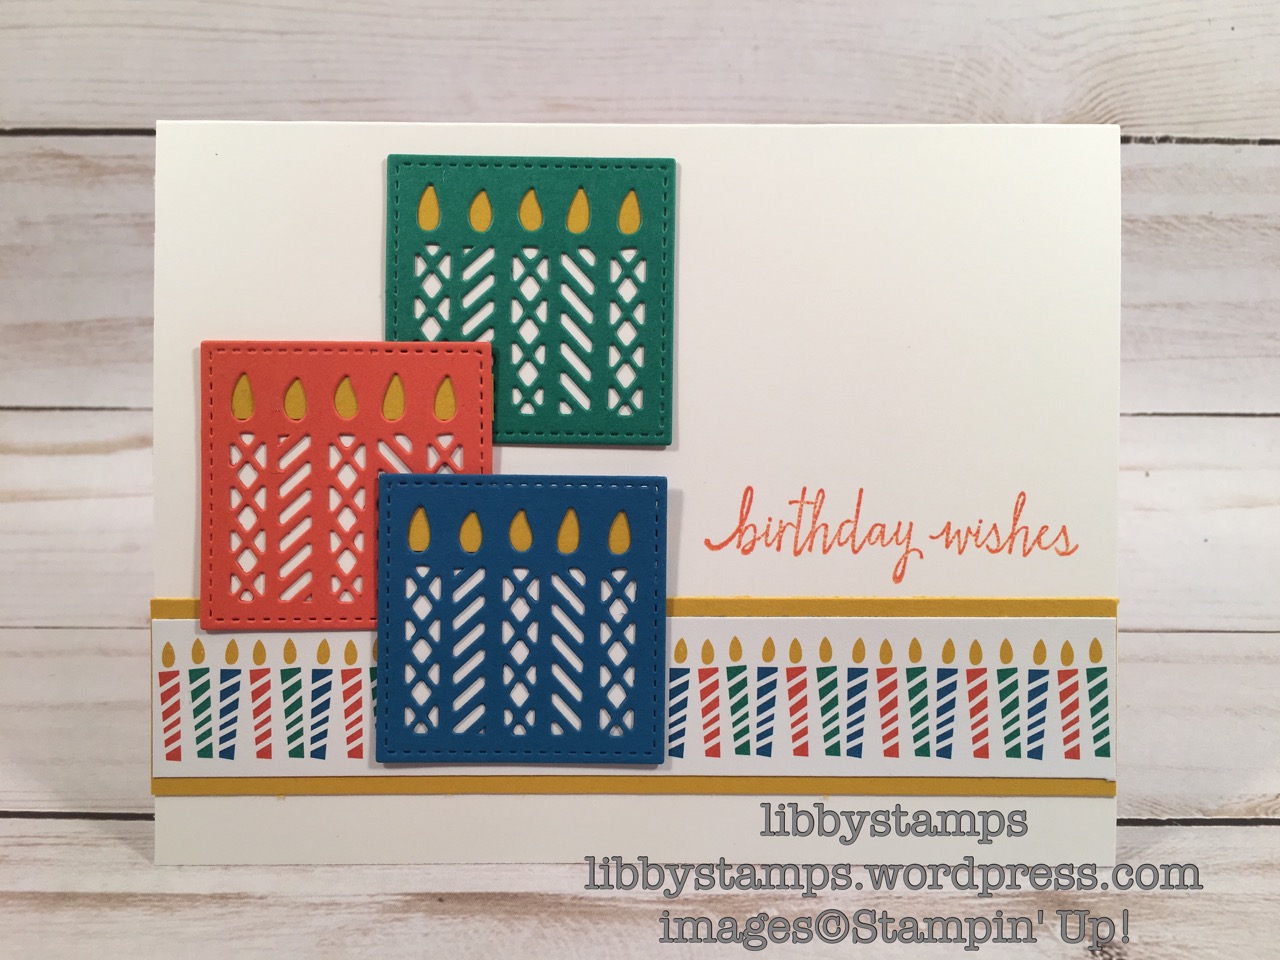 libbystamps, stampin up, Build a Birthday, Window Box Thinlits, Party Animal DSP, Occasions Mini 2017